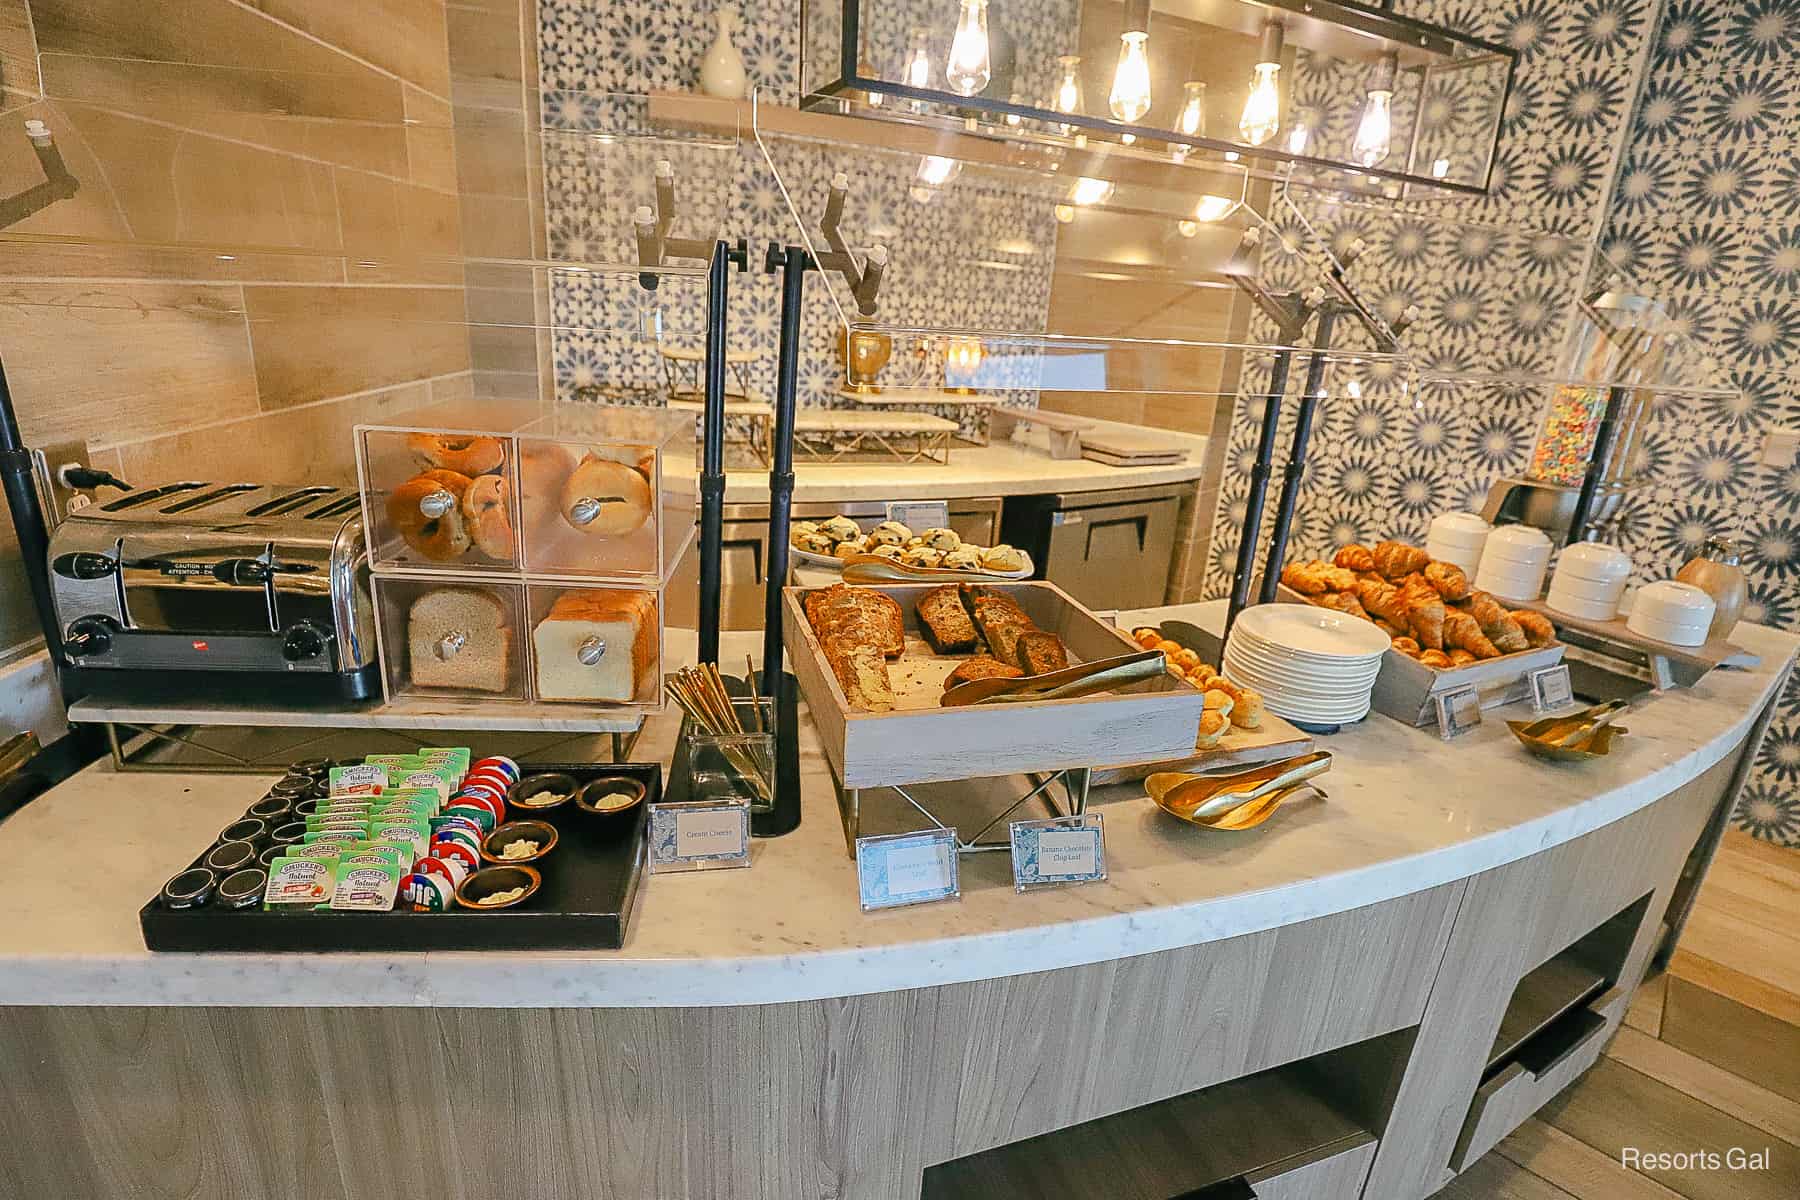 the buffet area for breakfast with various breads and other pastries 